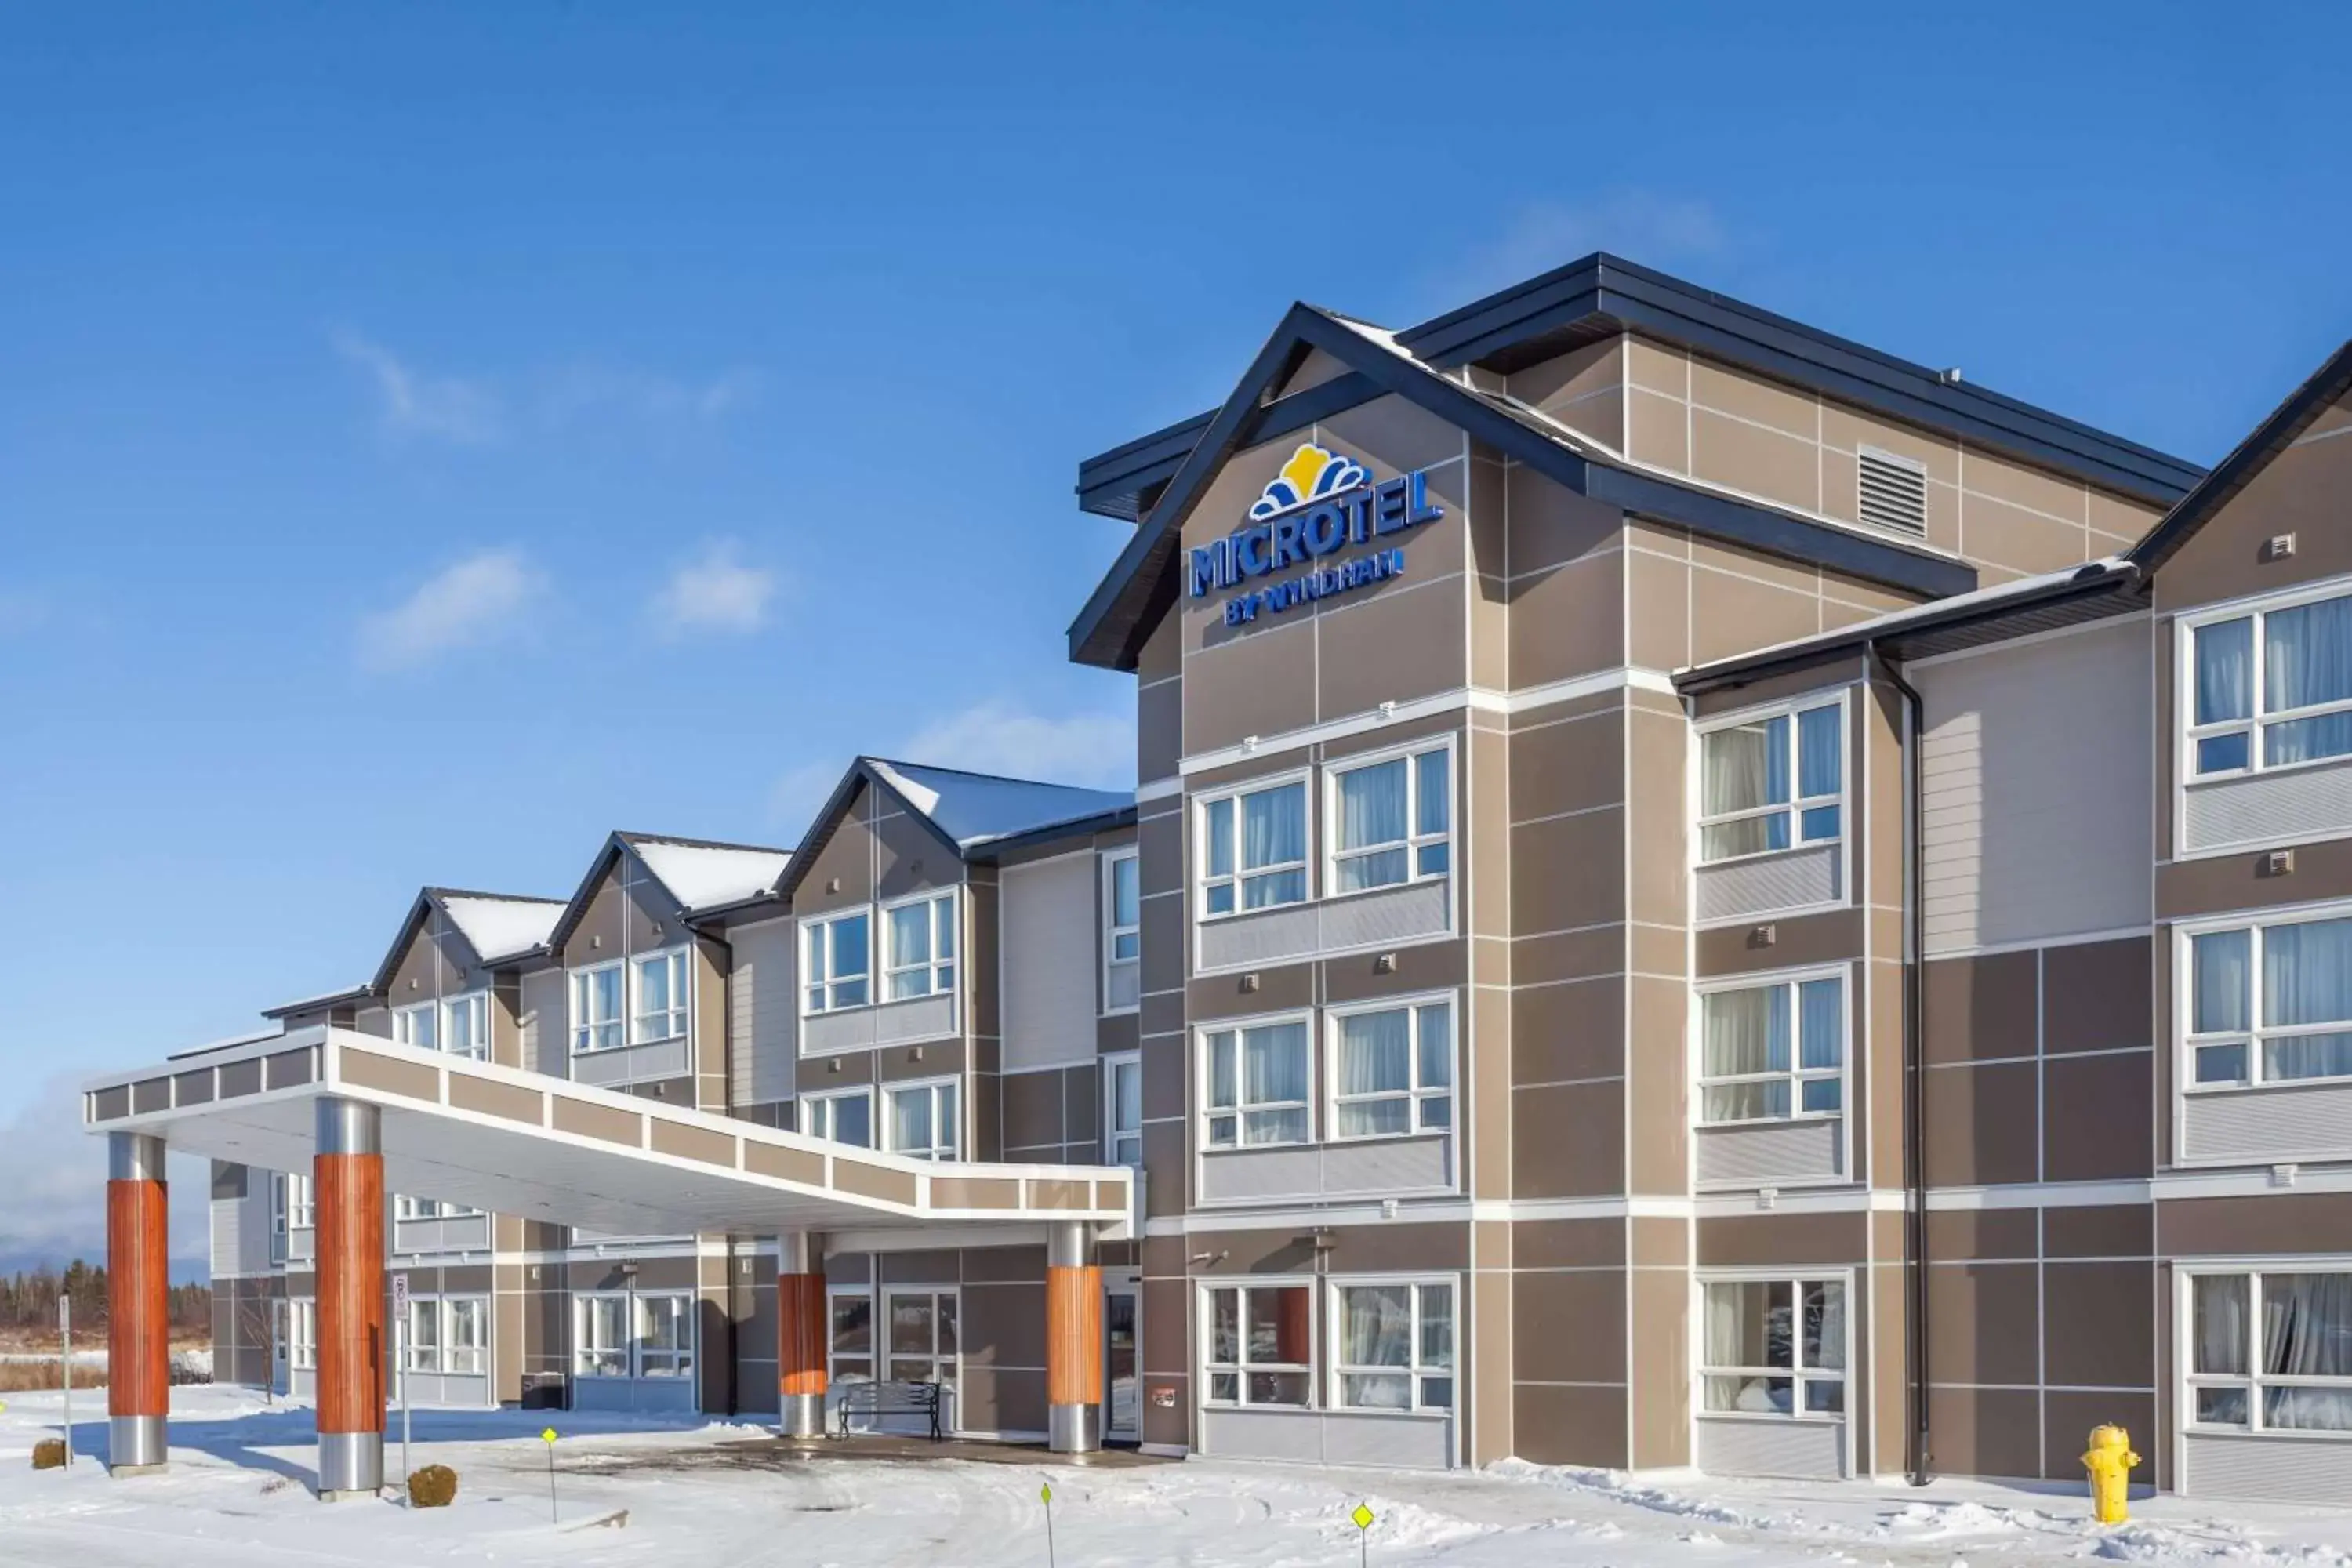 Property Building in Microtel Inn & Suites by Wyndham - Timmins